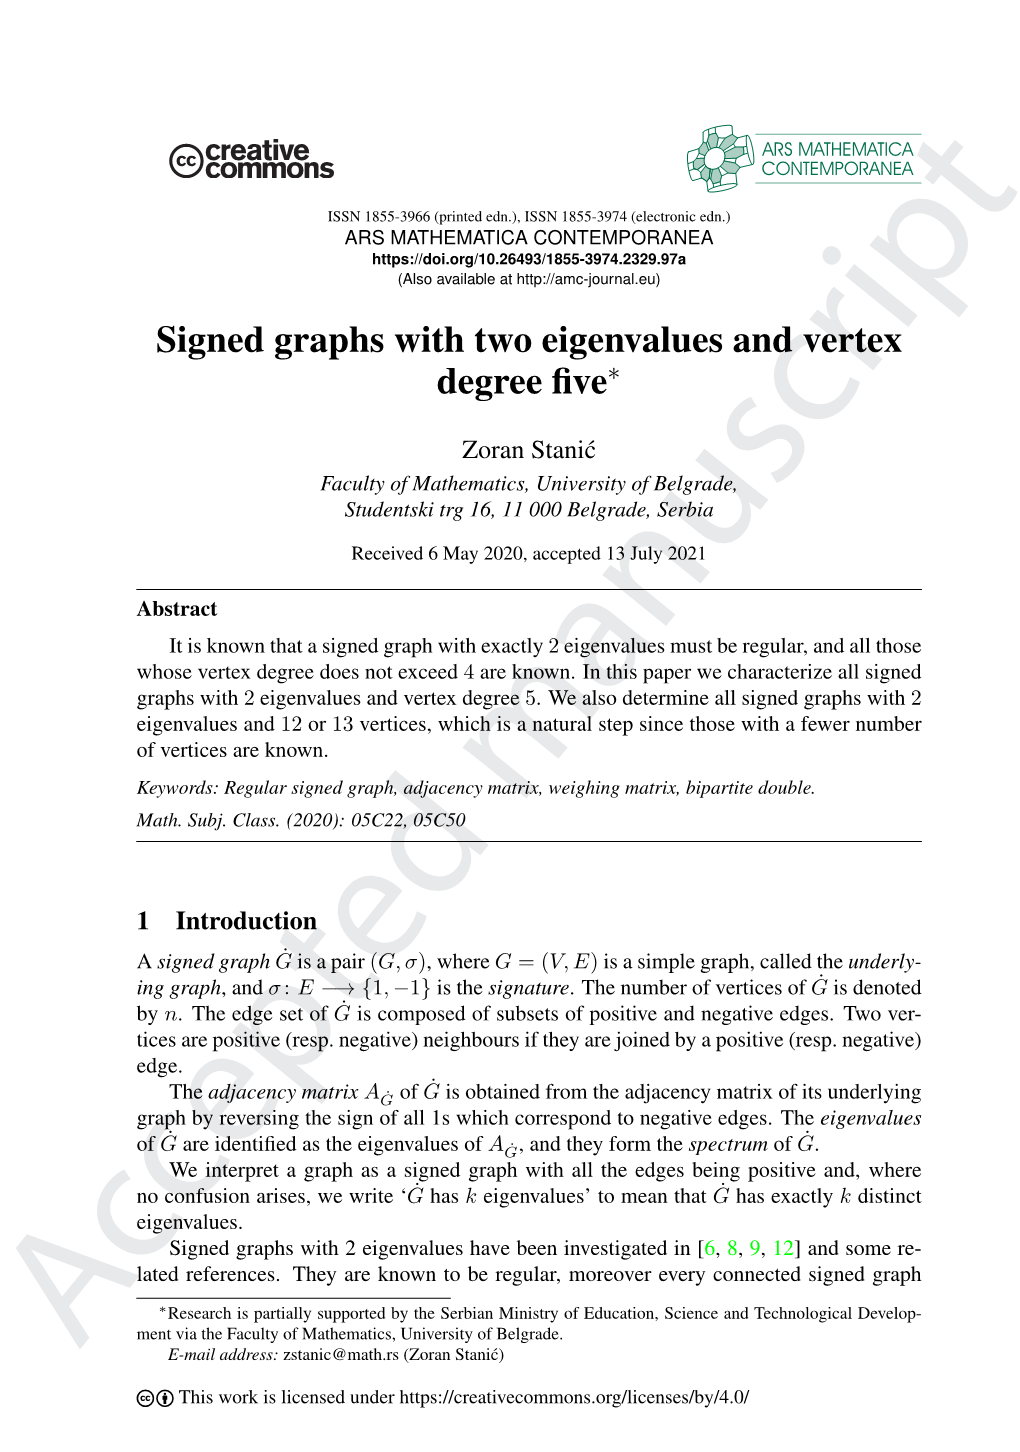 Signed Graphs with Two Eigenvalues and Vertex Degree Five